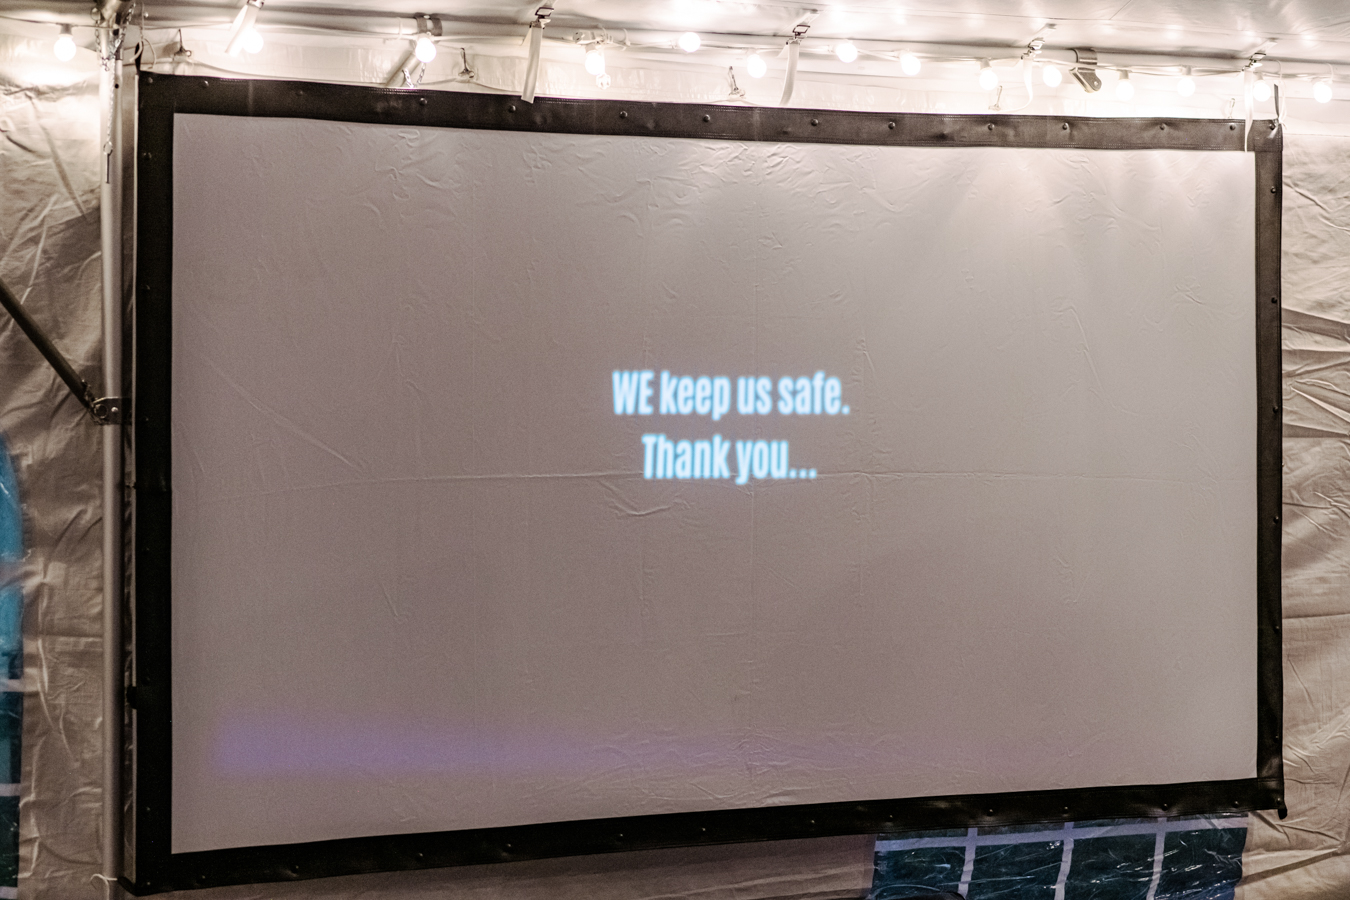 Screen with "We keep us safe" text from the closing of video presentation during SFNC gala